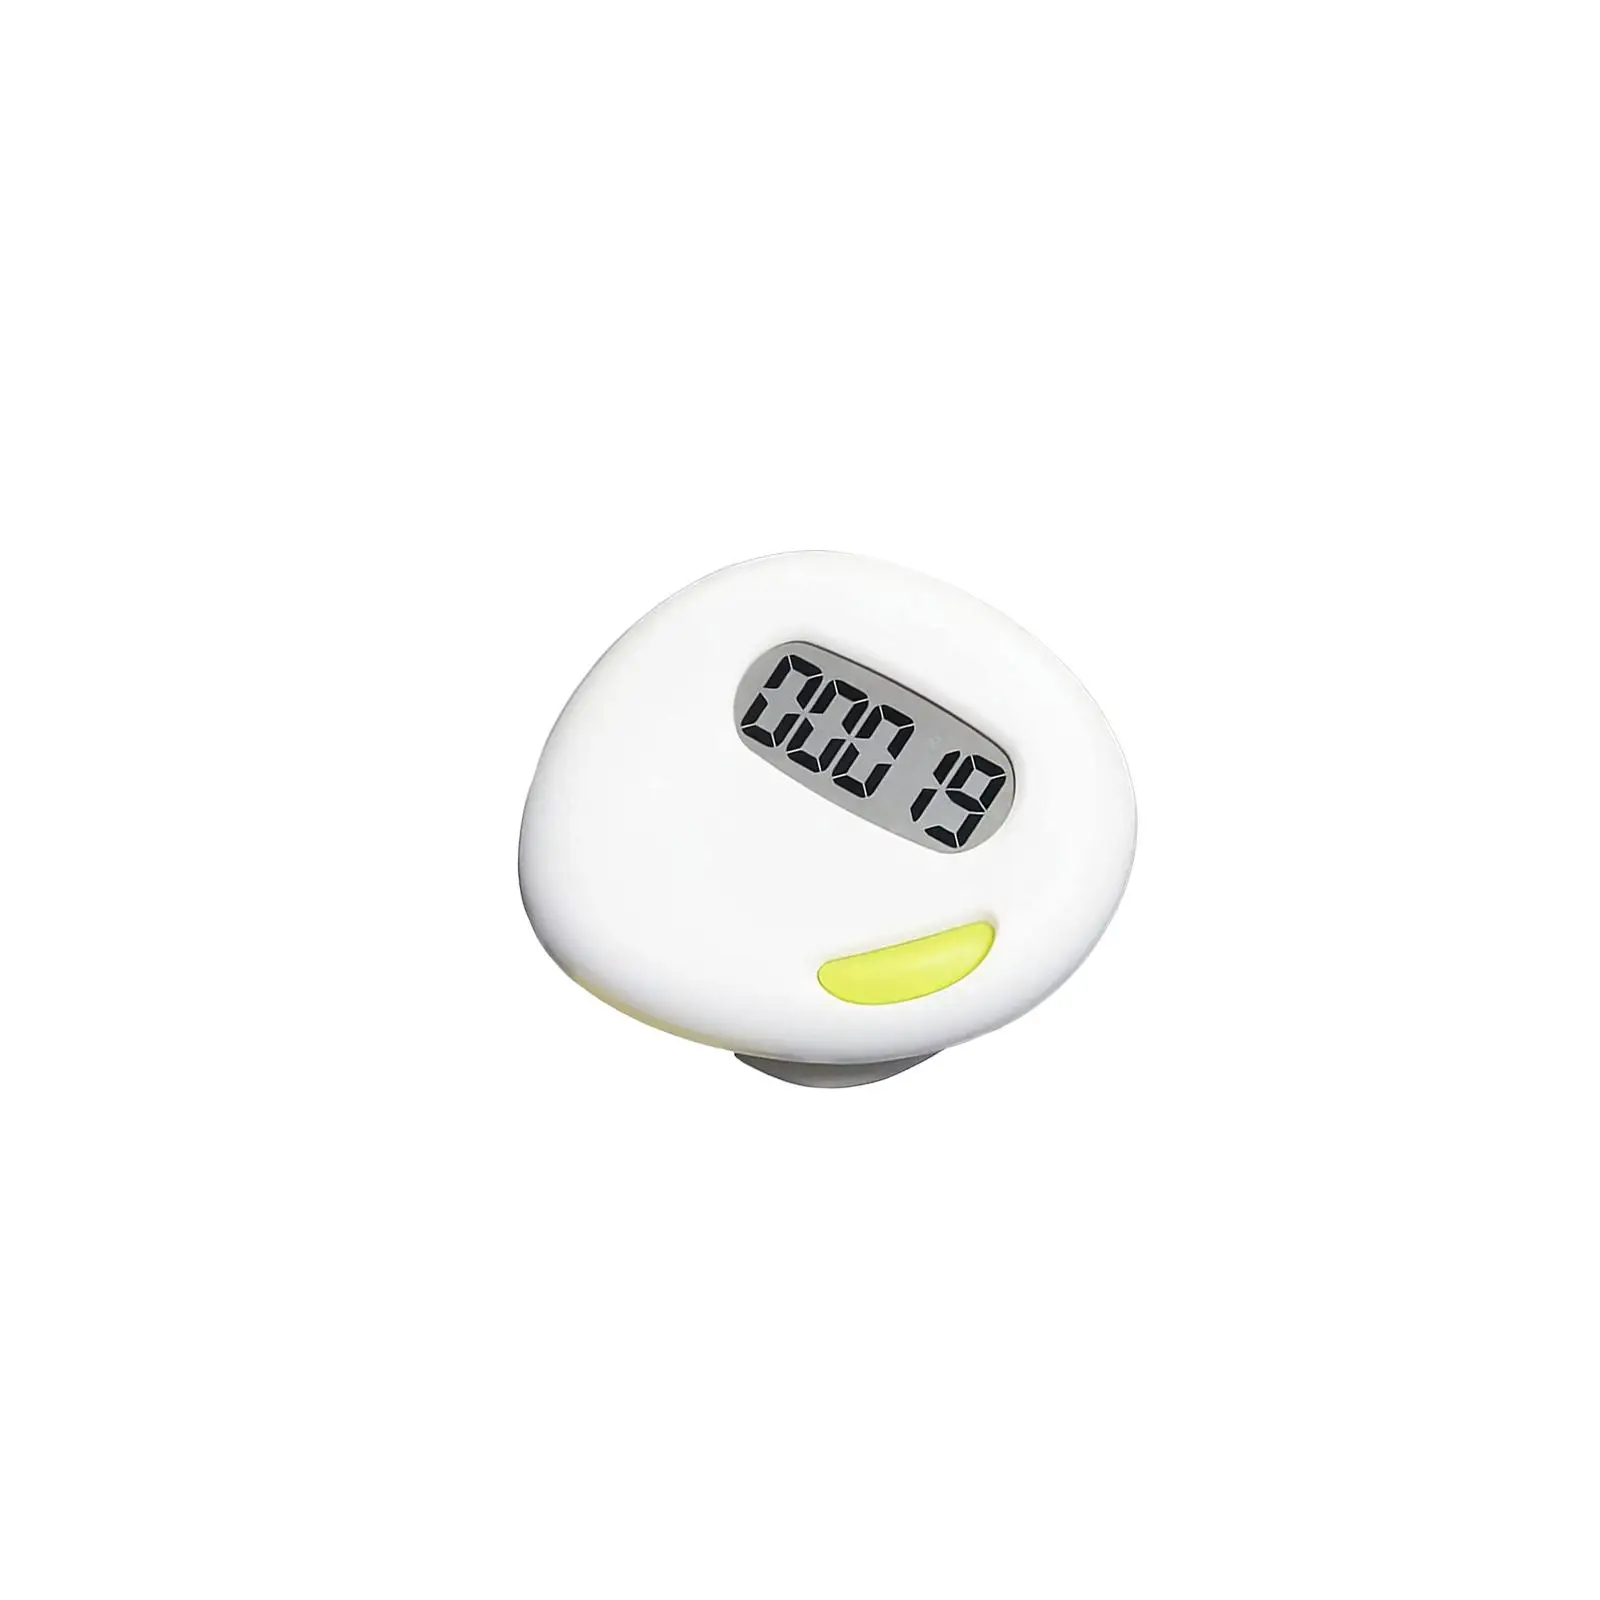 Electronic Pedometer Exercise Convenient 2D Digital Pedometer for